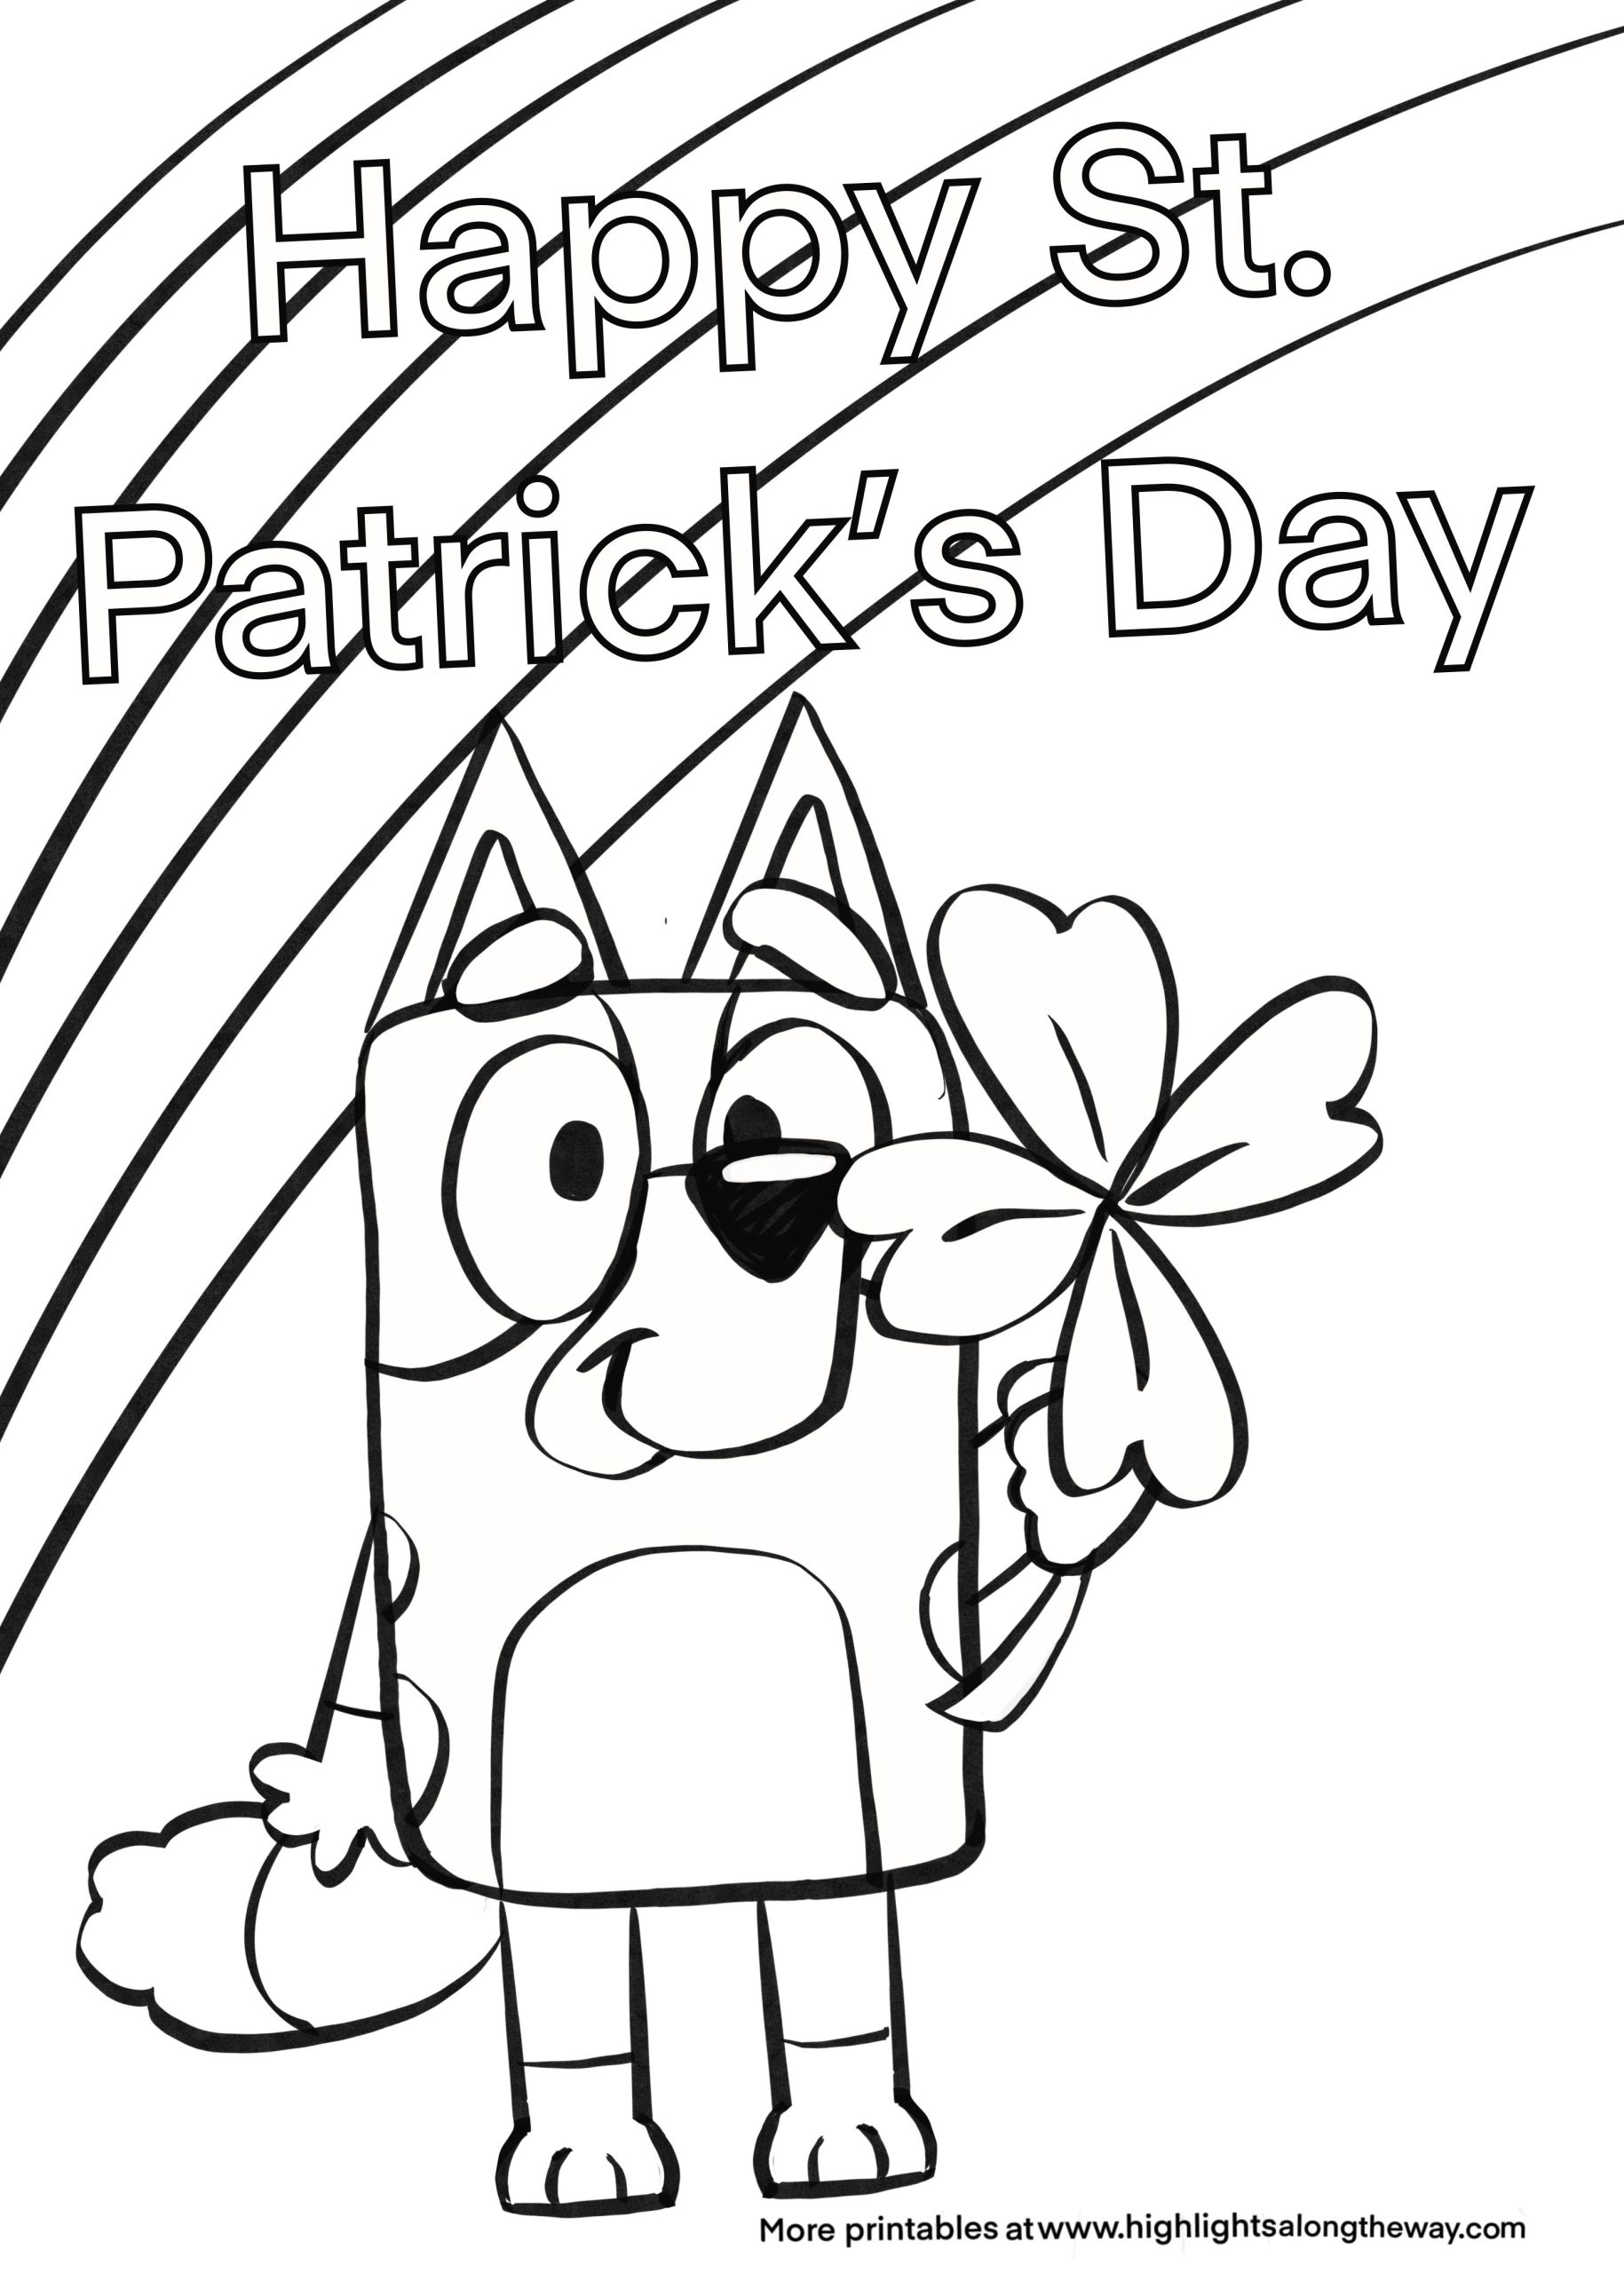 bluey-st-patrick-s-day-coloring-page-instant-download